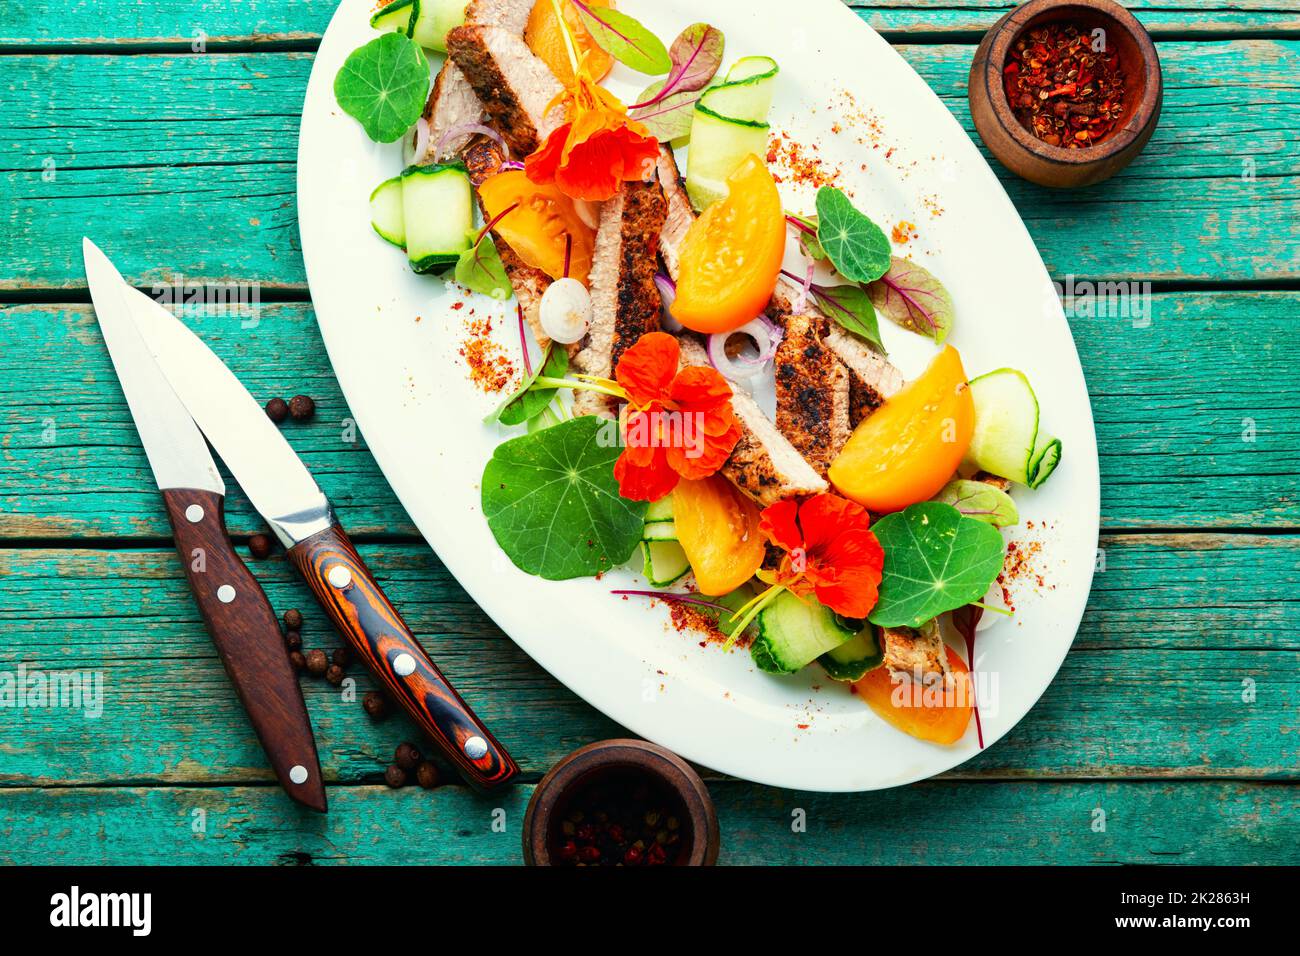 Sliced steak with vegetables, meat salad Stock Photo